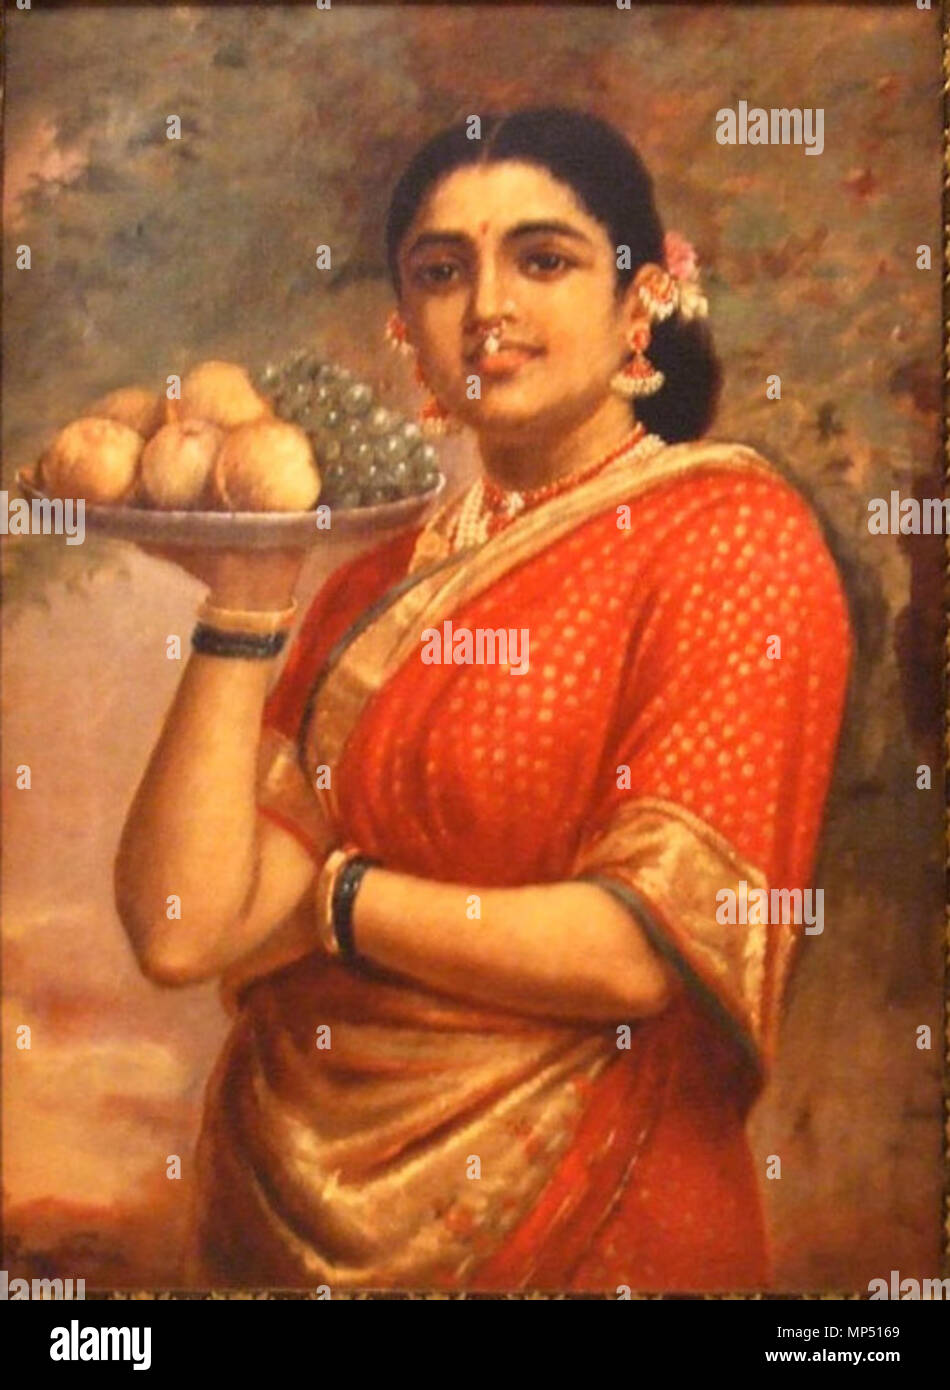 . English: This website is exclusively for Ravi Varma’s Oleographs, which is a result of more than 15 years of collection made throughout India. Ravi Varma has painted hundreds of paintings which have spread throughout India (in Palaces and Museums) and other countries like England ,USA, etc.,. Only a portion of Ravi Varma’s paintings got printed as Oleographs. These Oleographs are from 80 to 115 years old, which are hosted as a website. This website is the single largest collection of Ravi Varma's oleographs in India, it says more about Ravi Varma, his style and India’ s cultural heritage . W Stock Photo